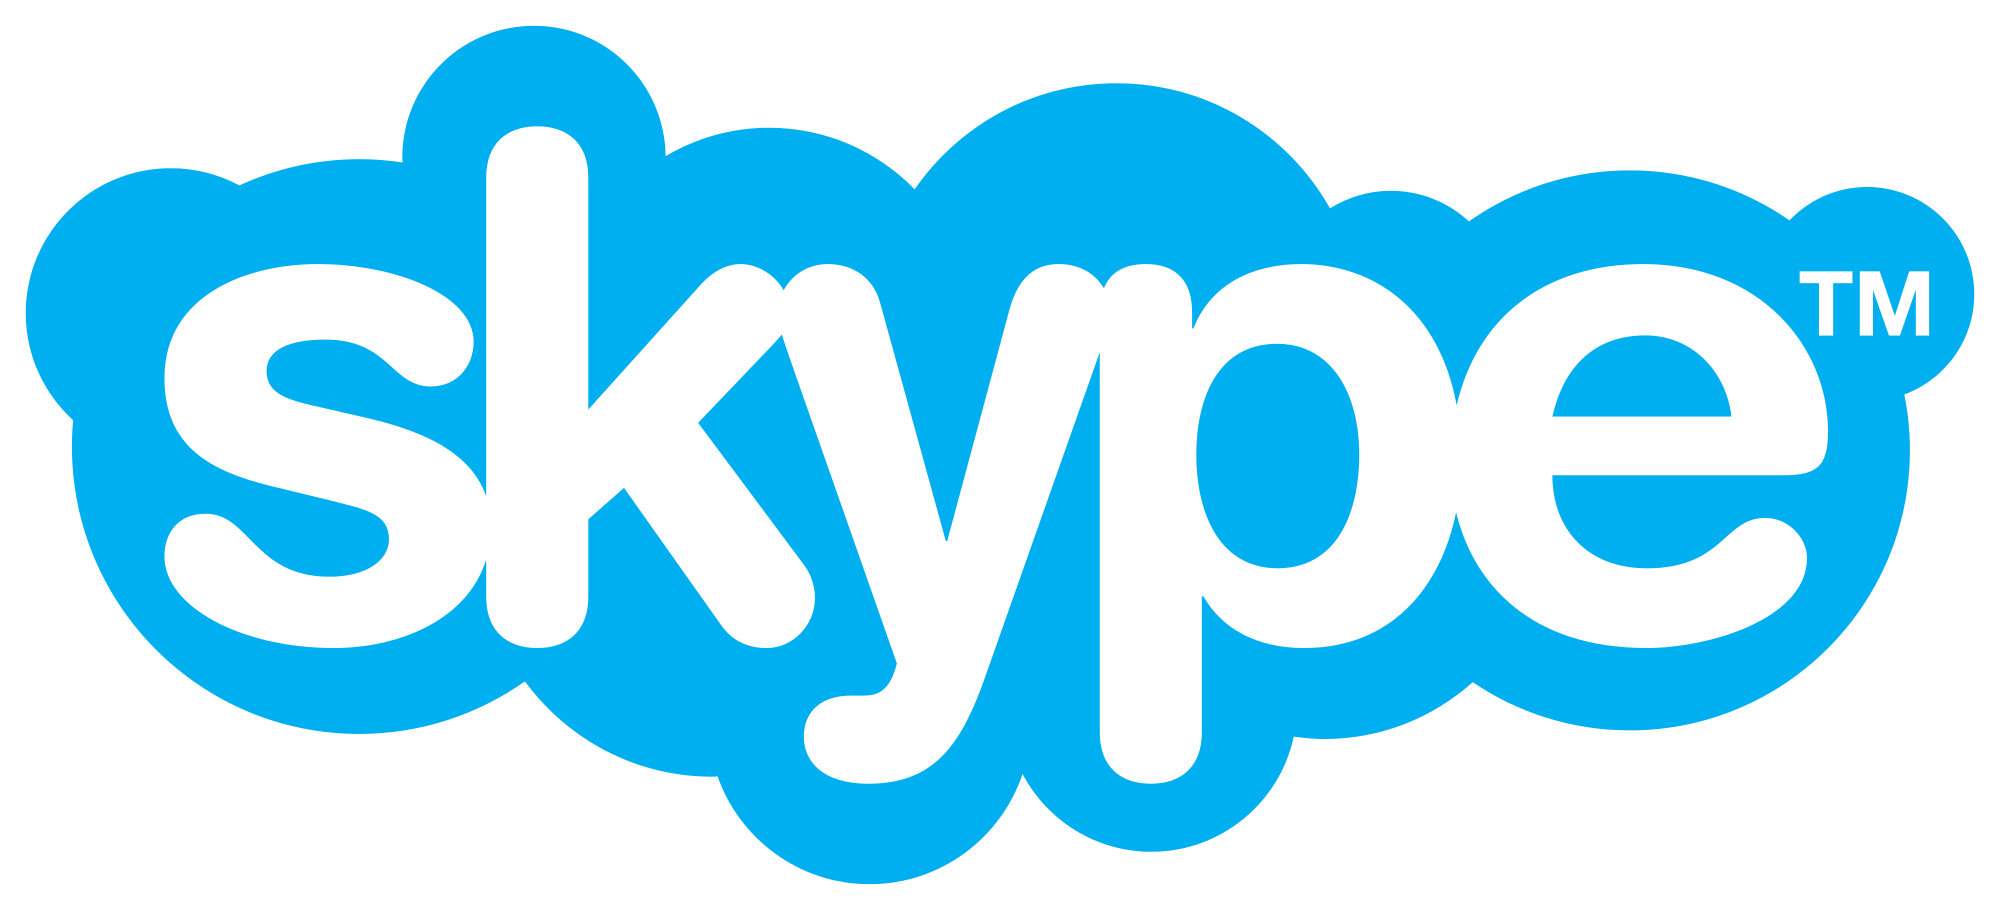 “Can Hypnotherapy Be Performed Over Skype?”